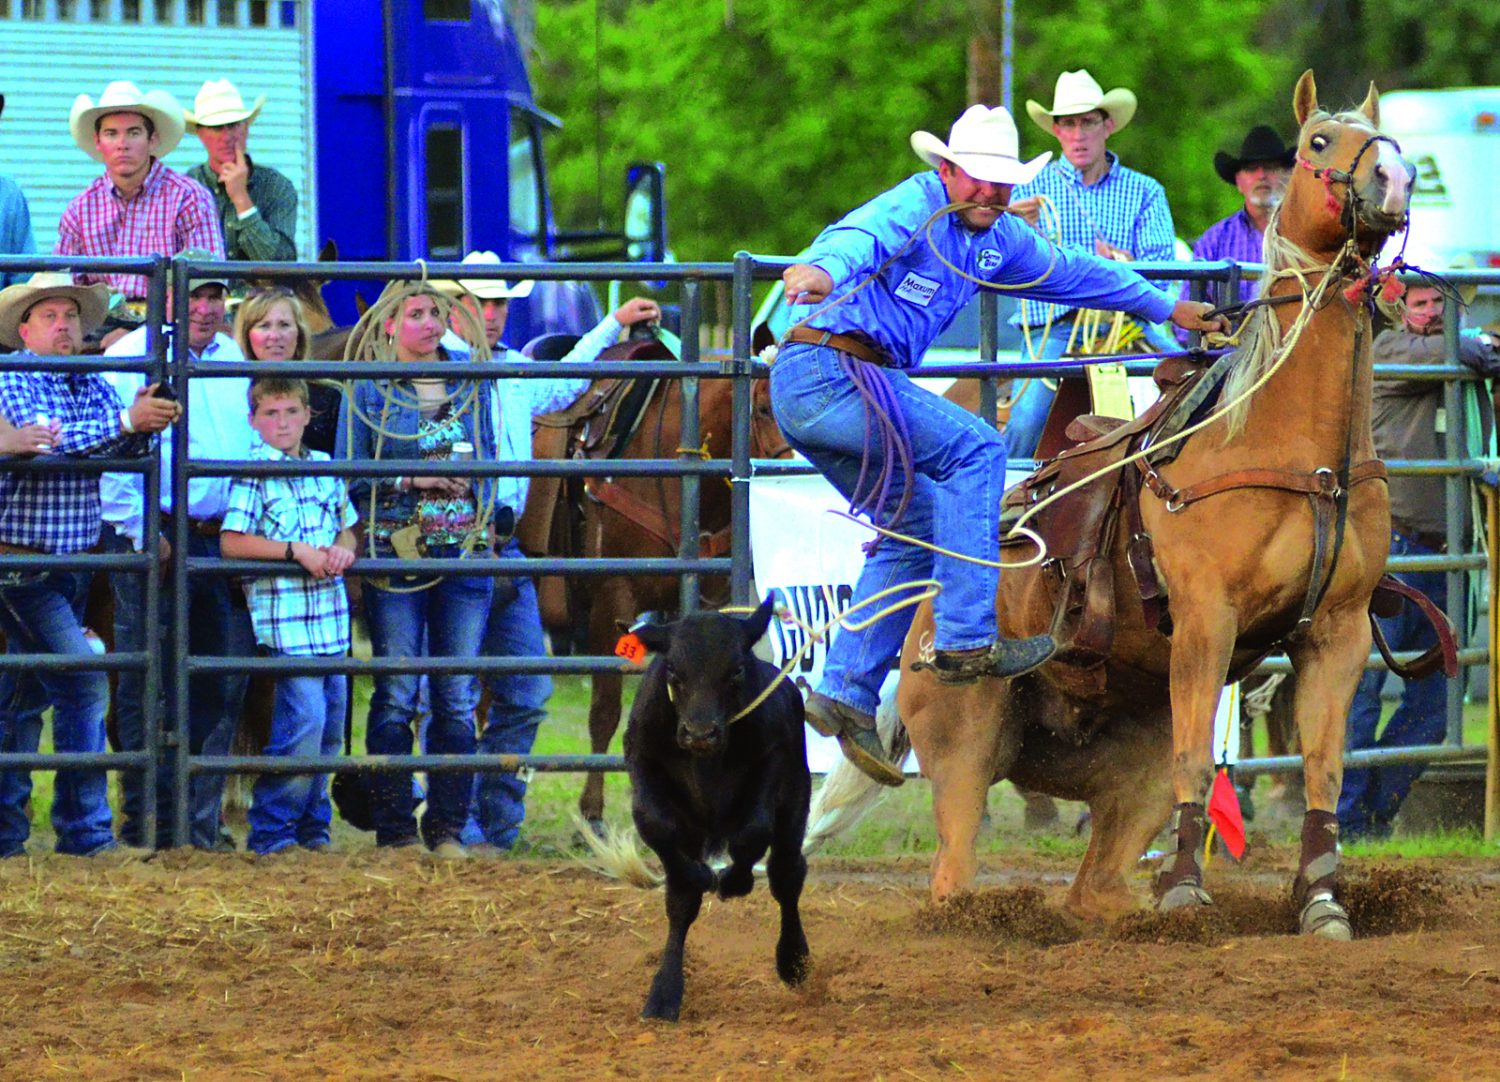 The thrills & spills of pro rodeo in Merrill this weekend